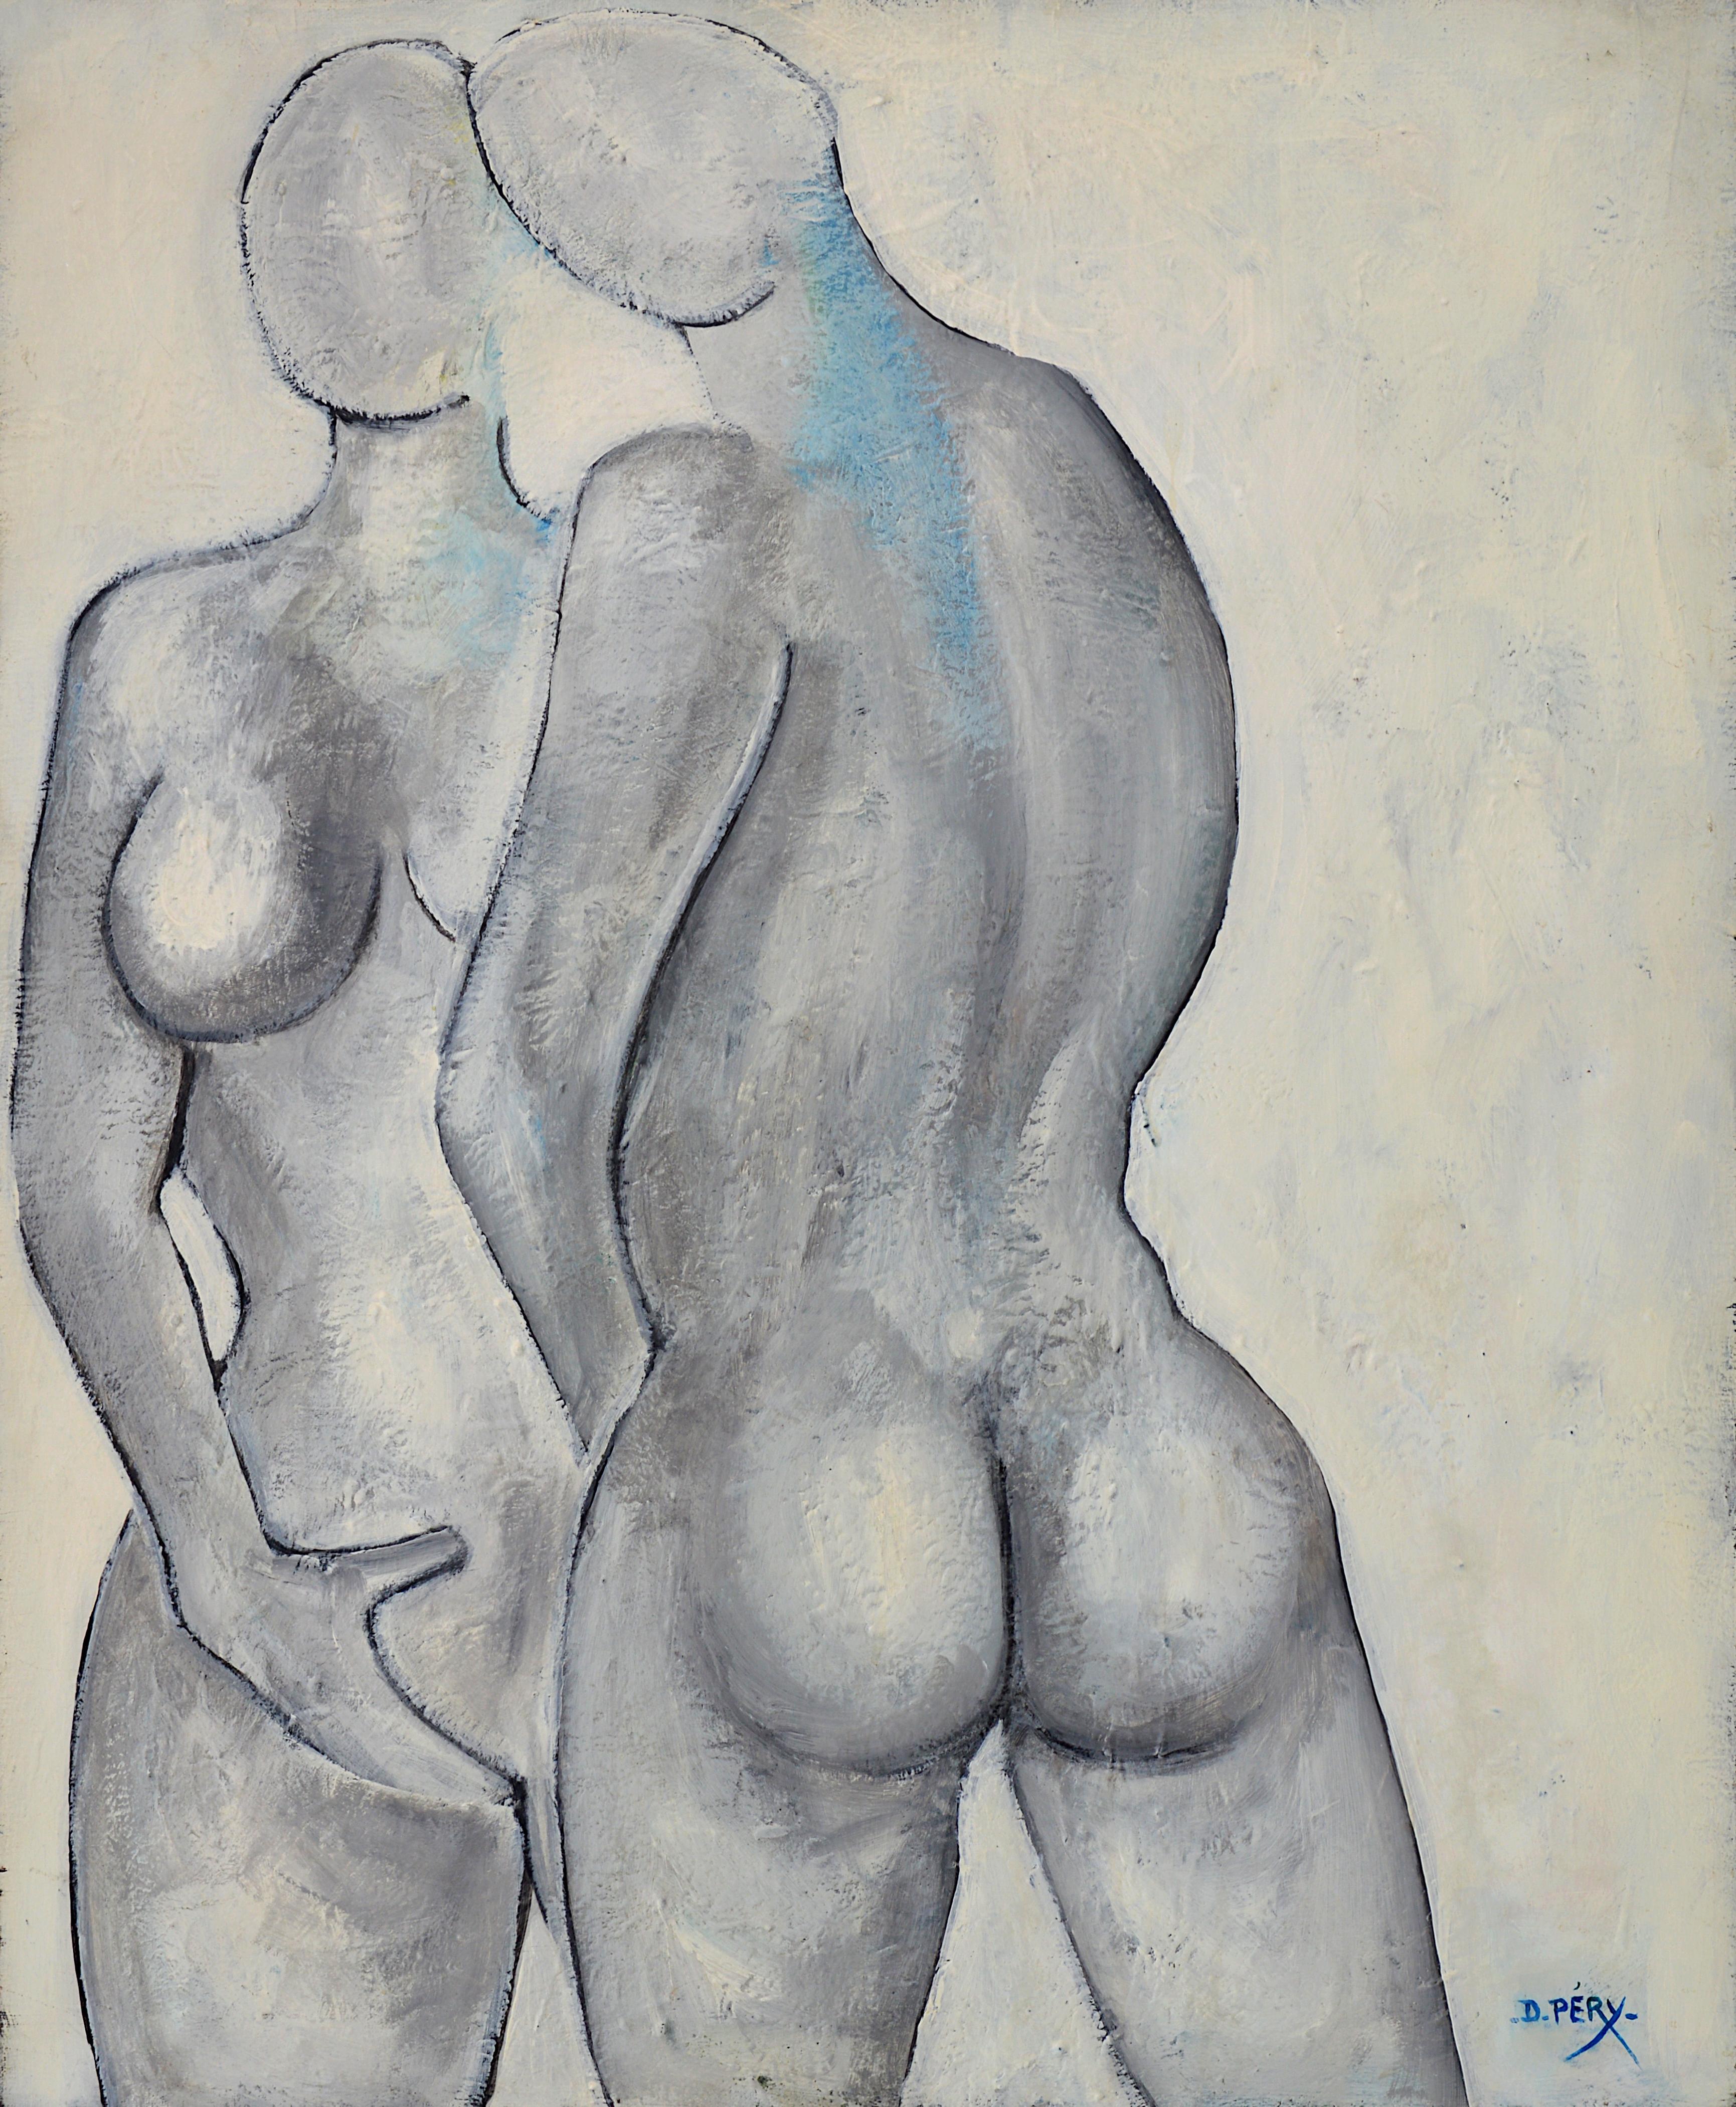 Dominique PERY, Marianne, Oil on canvas 1987 - Painting by Dominique Pery